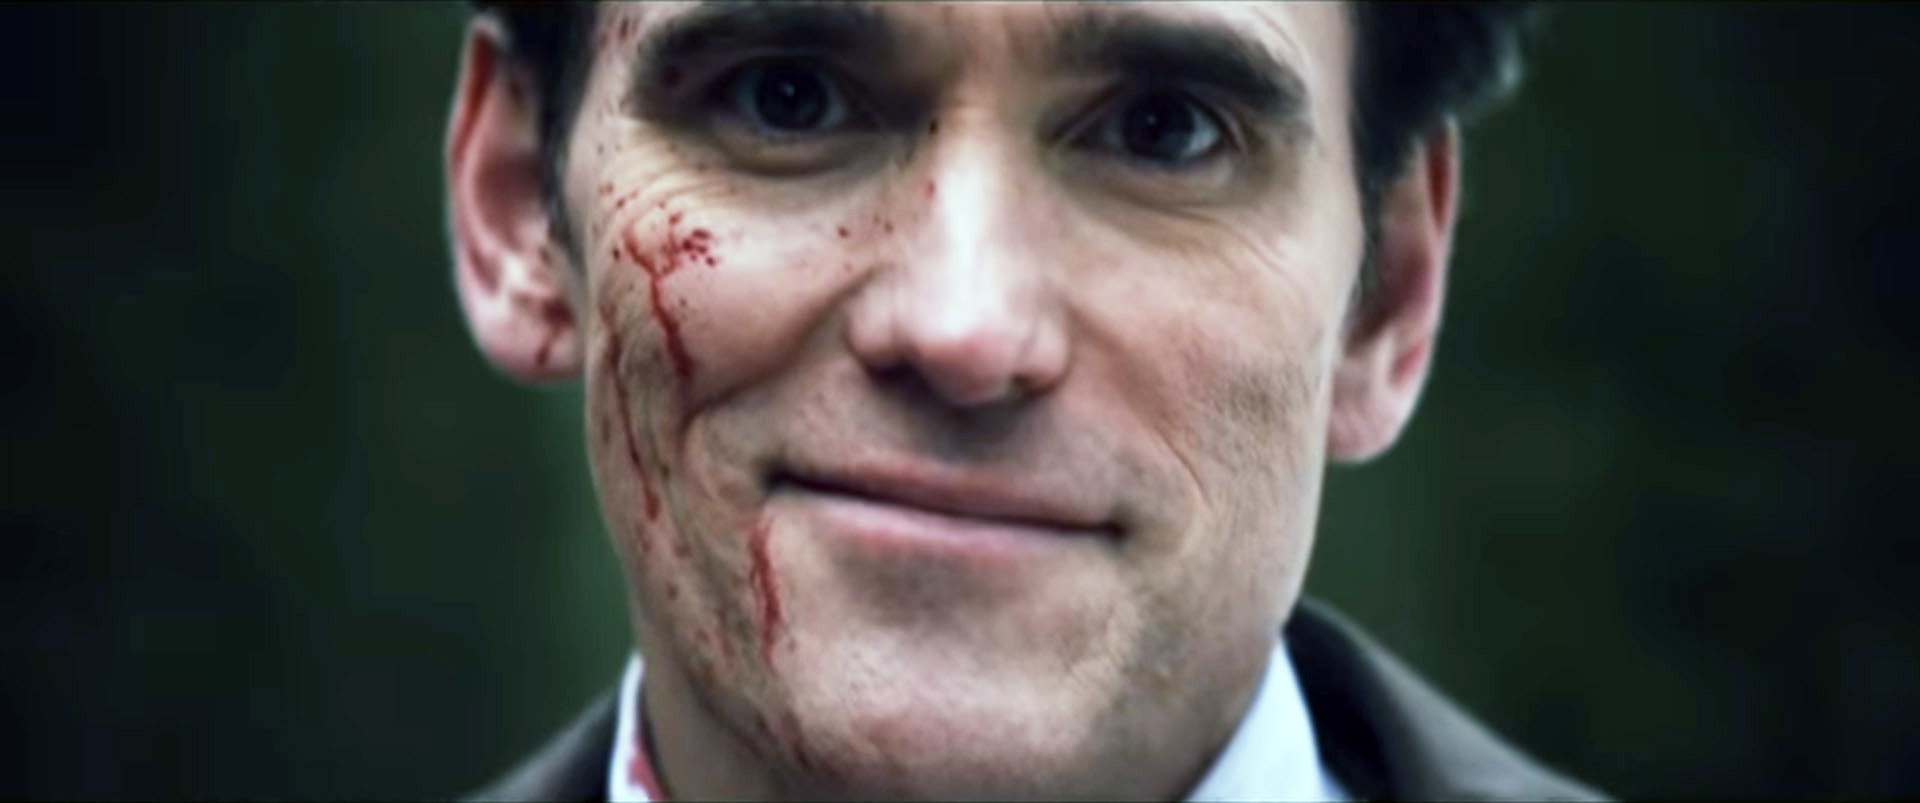 A man covered in blood smiles at the camera